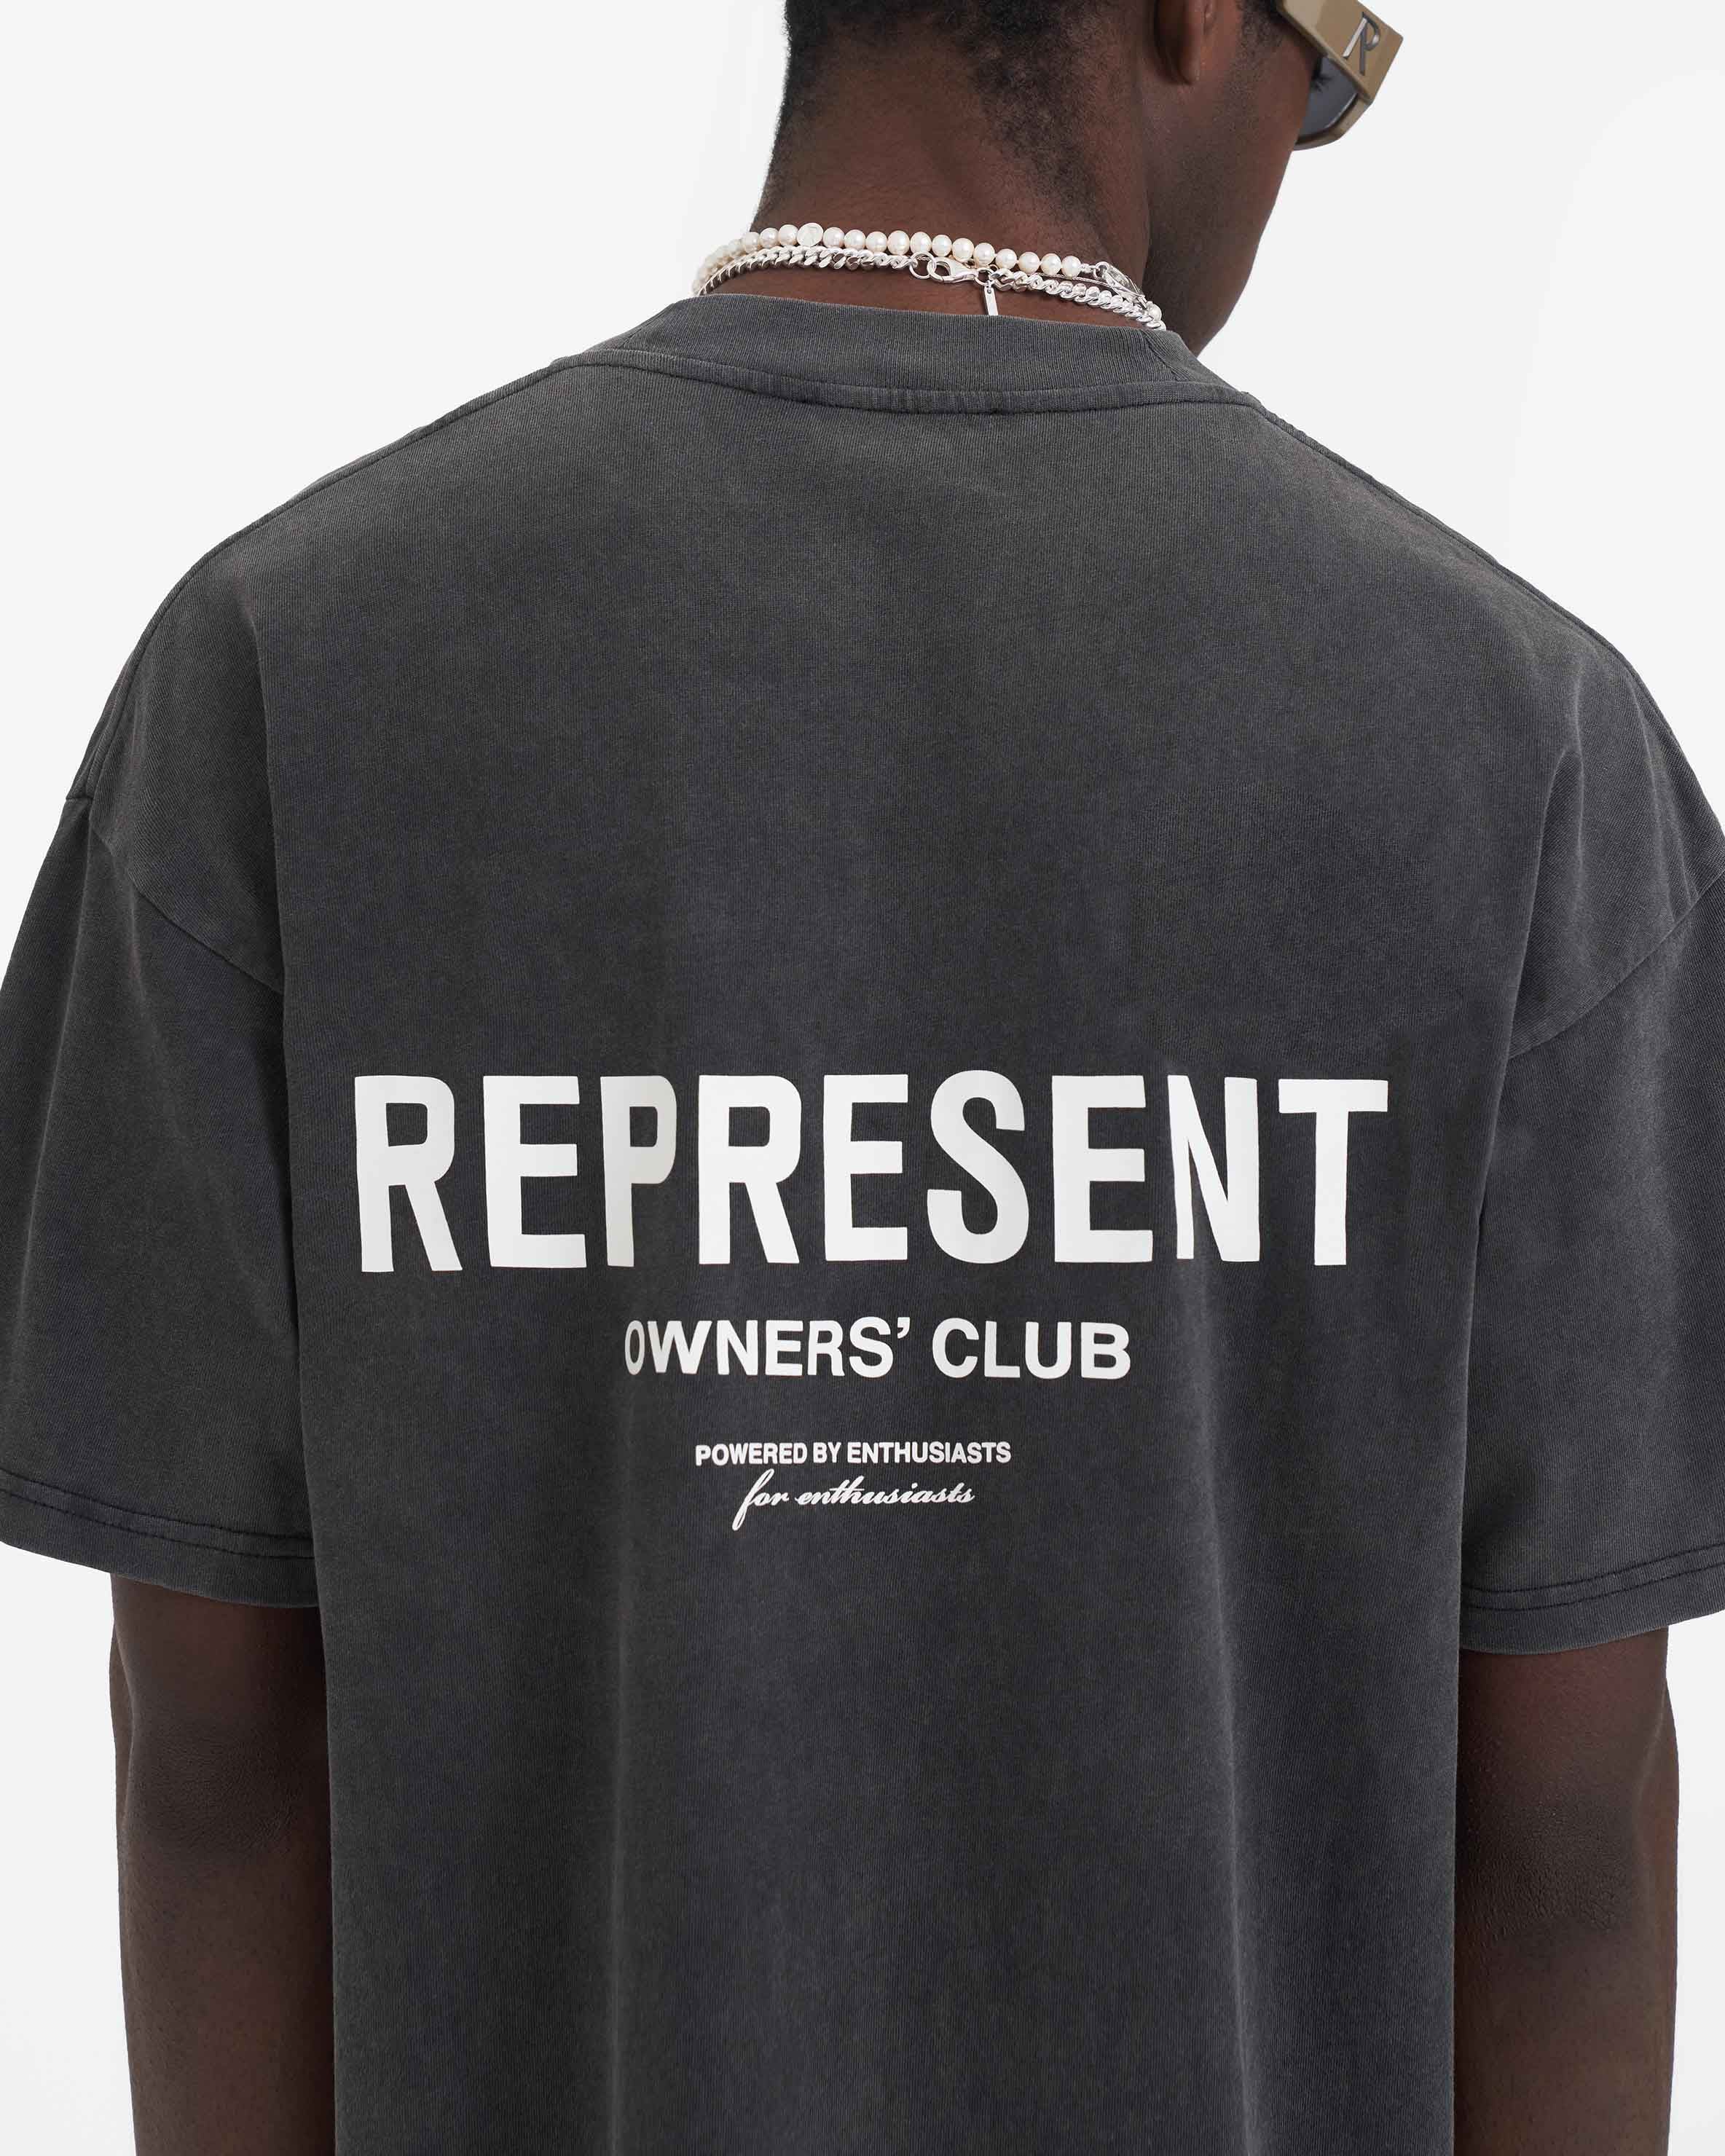 Represent Owners Club T-Shirt - Vintage Snow White